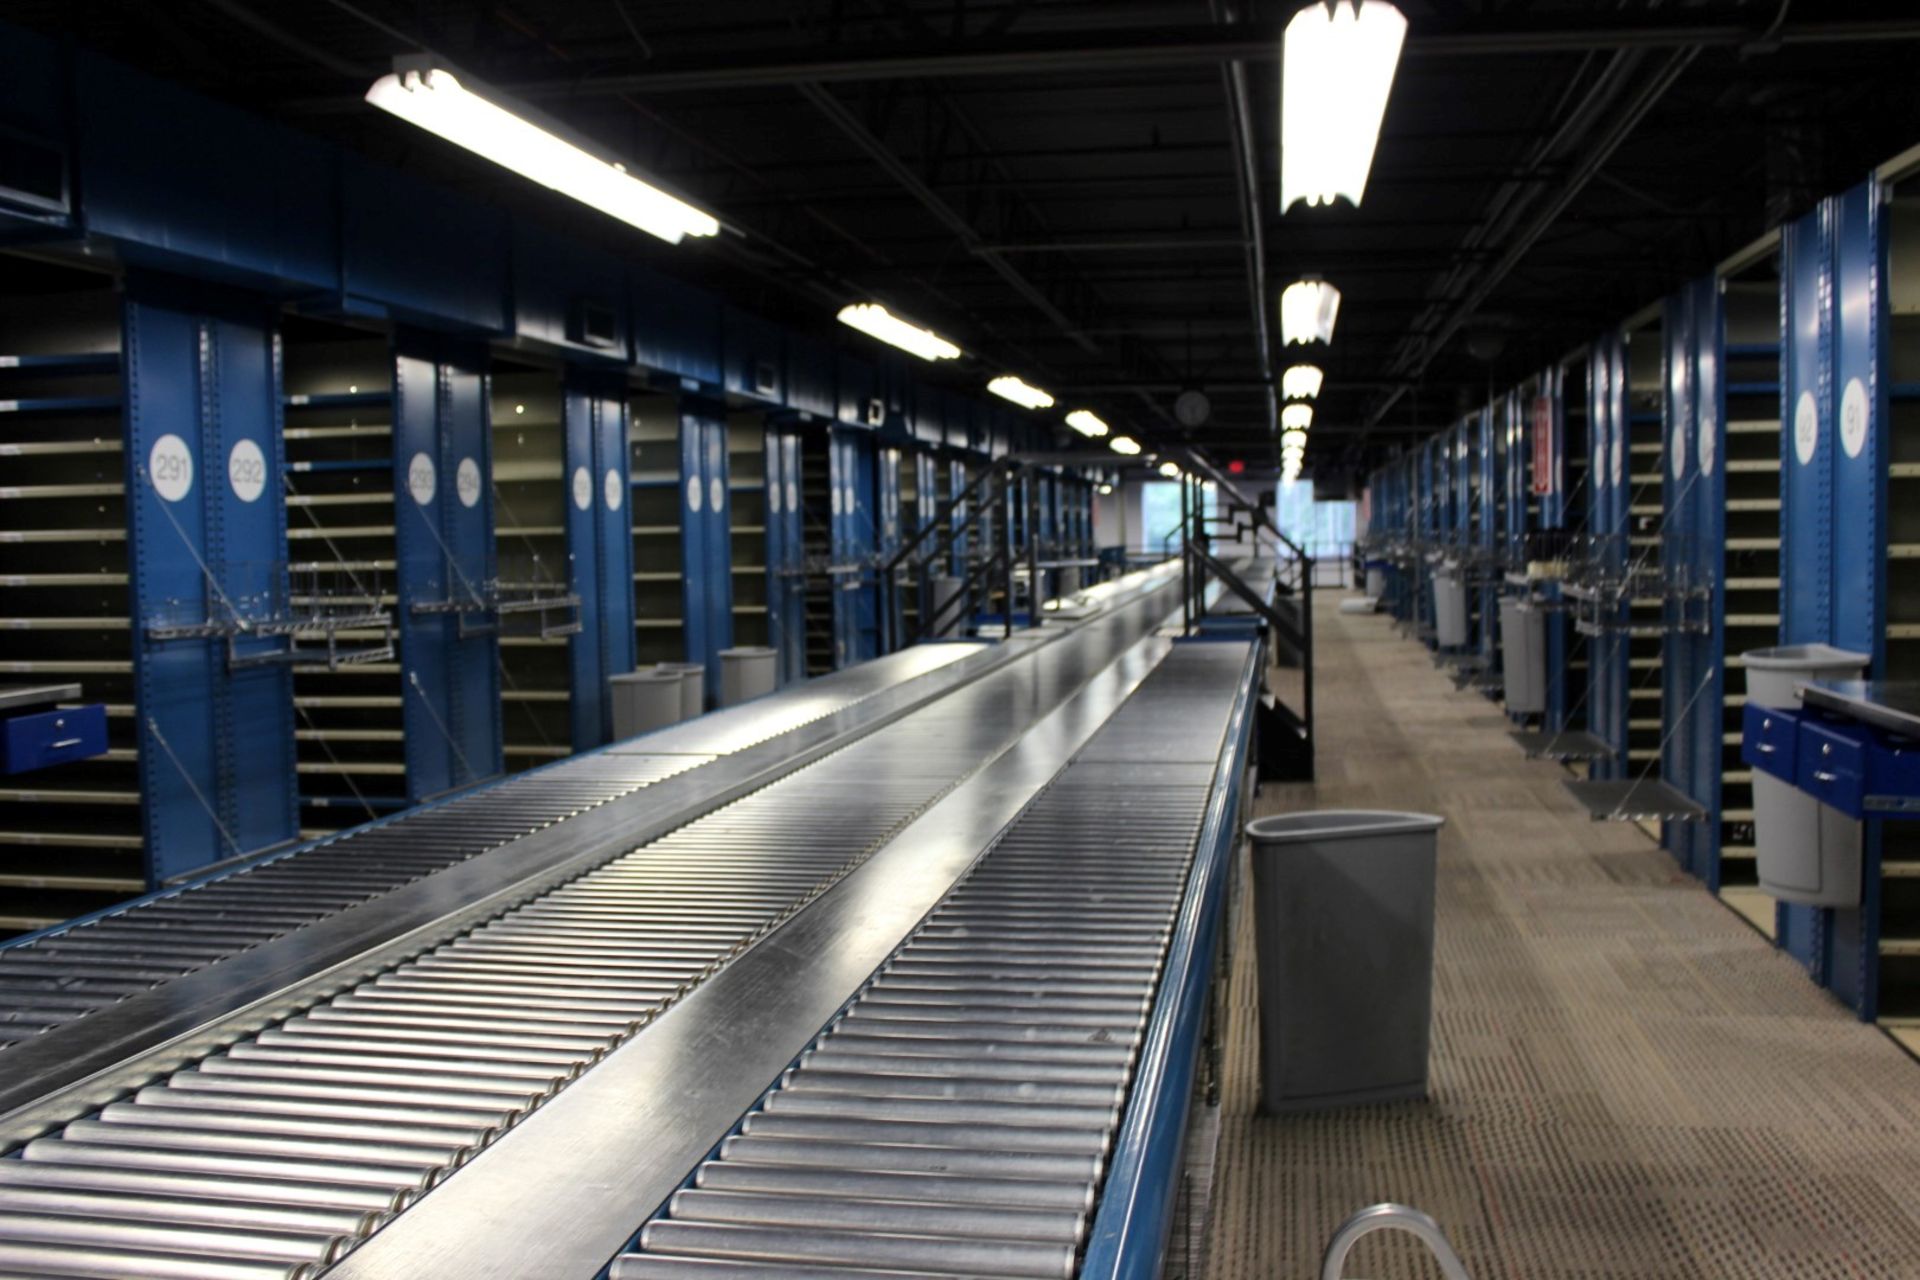 30 FT LONG 24"W RAPISTAN POWERED CONVEYOR WITH 18"W GRAVITY CONVEYOR LINES BOTH SIDES - Image 3 of 3